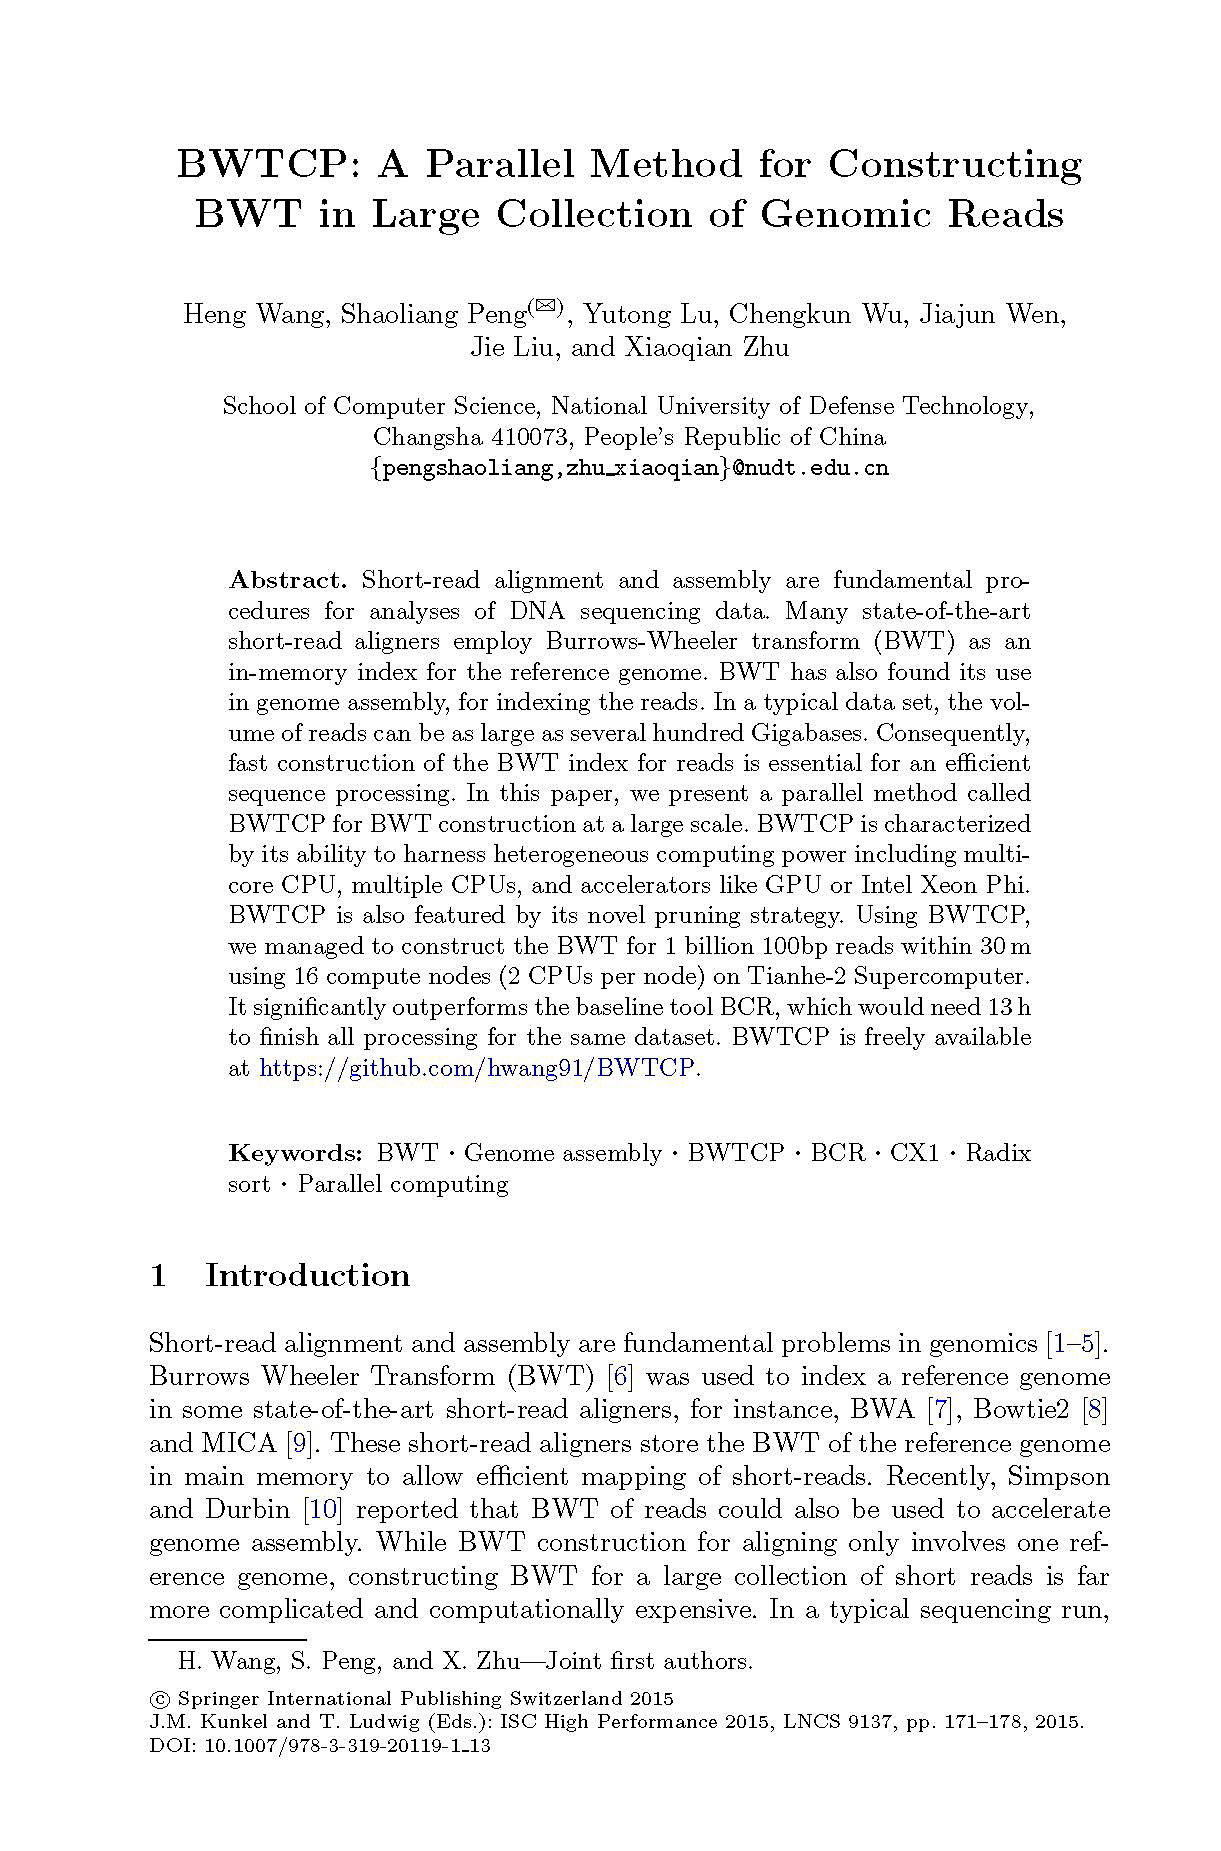 [68] Wang, H., Peng, S.*,Lu, Y., Wu, C., Wen, J., Liu, J., & Zhu, X. (2015, July). BWTCP: A parallel method for constructing BWT in large collection of genomic reads. In International Conference on High Performance Computing (pp.171-178). Springer, Cham.（通讯作者）